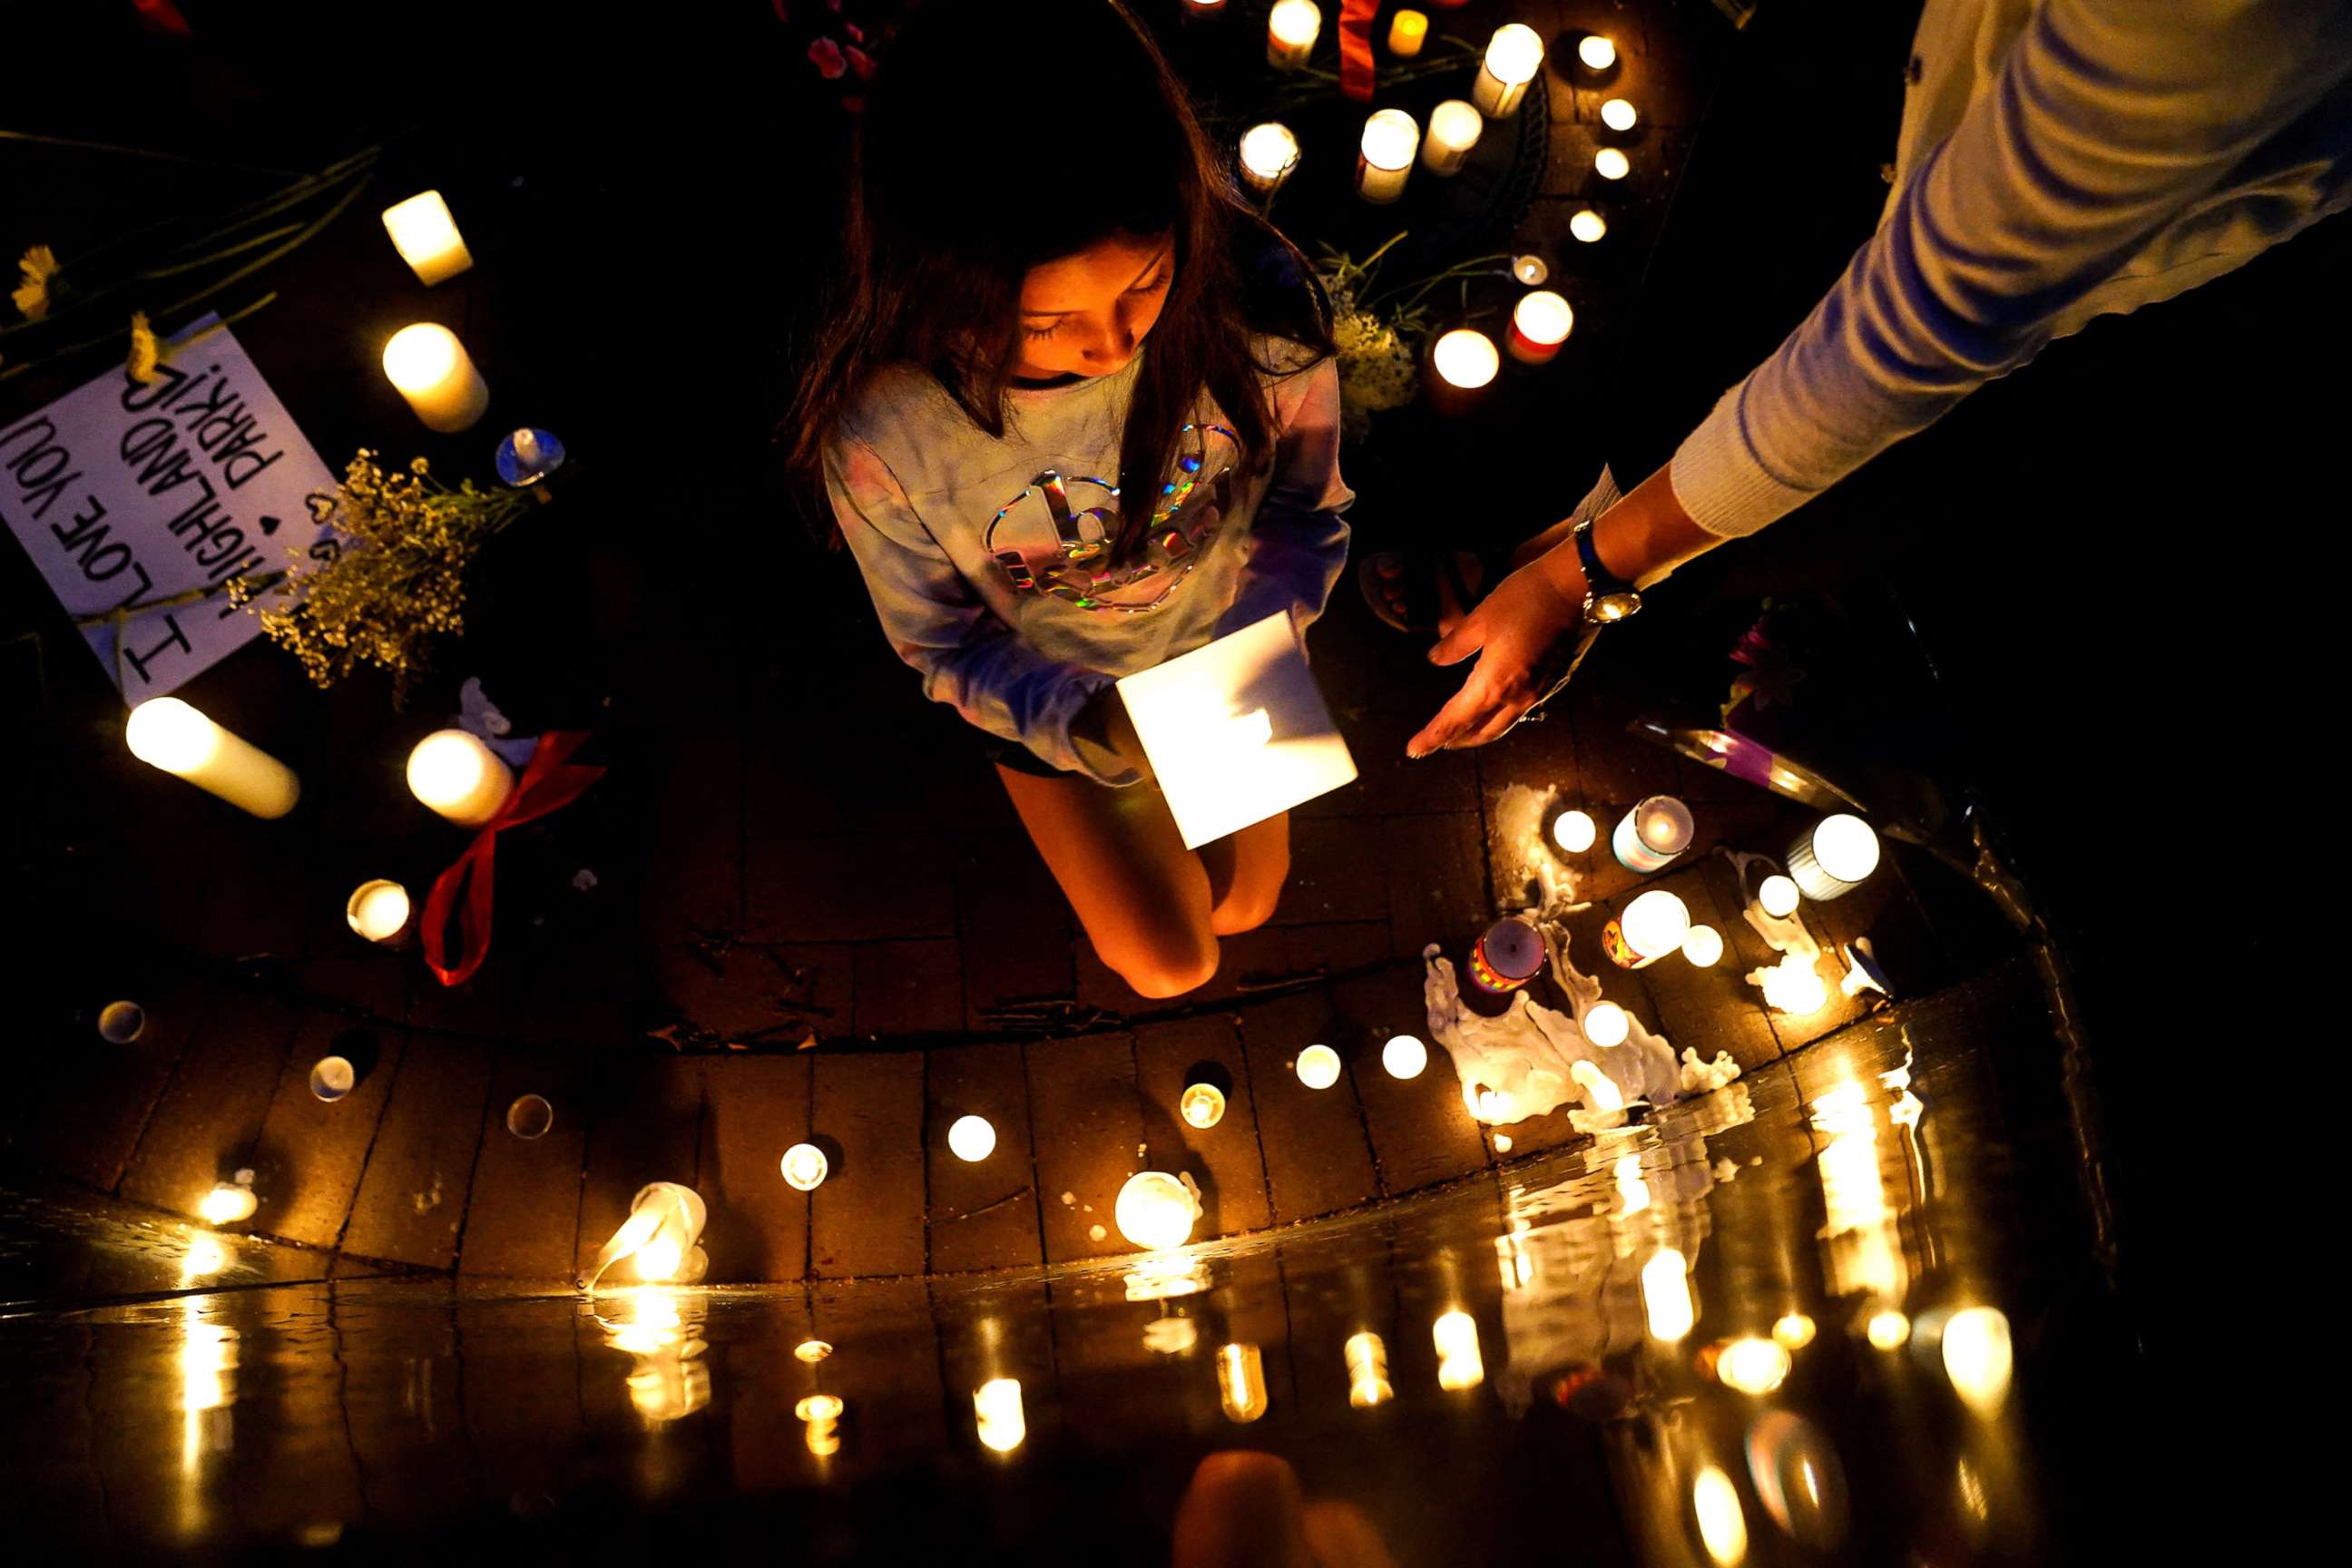 PHOTO: Community members light candles and leave messages at a memorial site near the parade route the day after a mass shooting at a Fourth of July parade in the Chicago suburb of Highland Park, Ill., July 5, 2022.